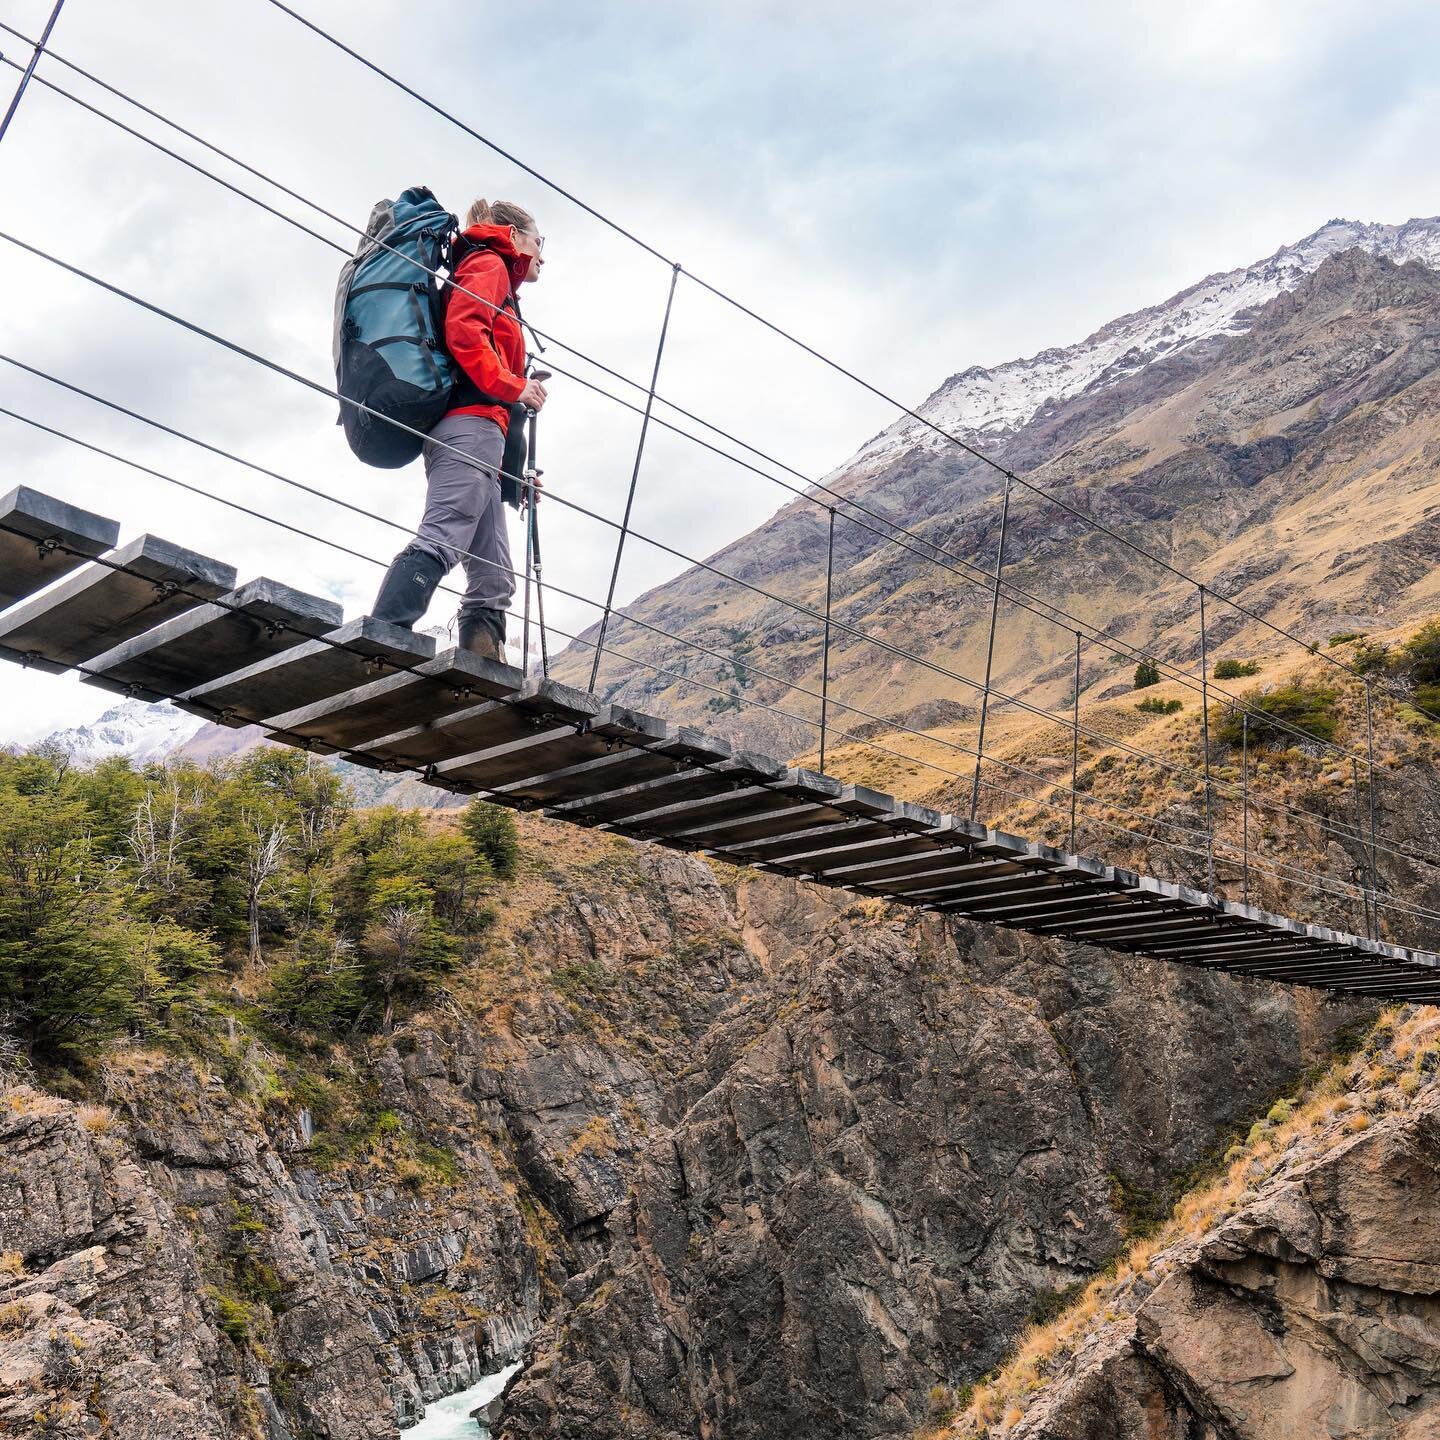 There's nothing like a rope bridge to make a trail feel like an adventure out of a children's book. The world could use a few more rope bridges (and a relevant emoji 🙃). 

This was one small moment from our Patagonia trip, exploring a new national p